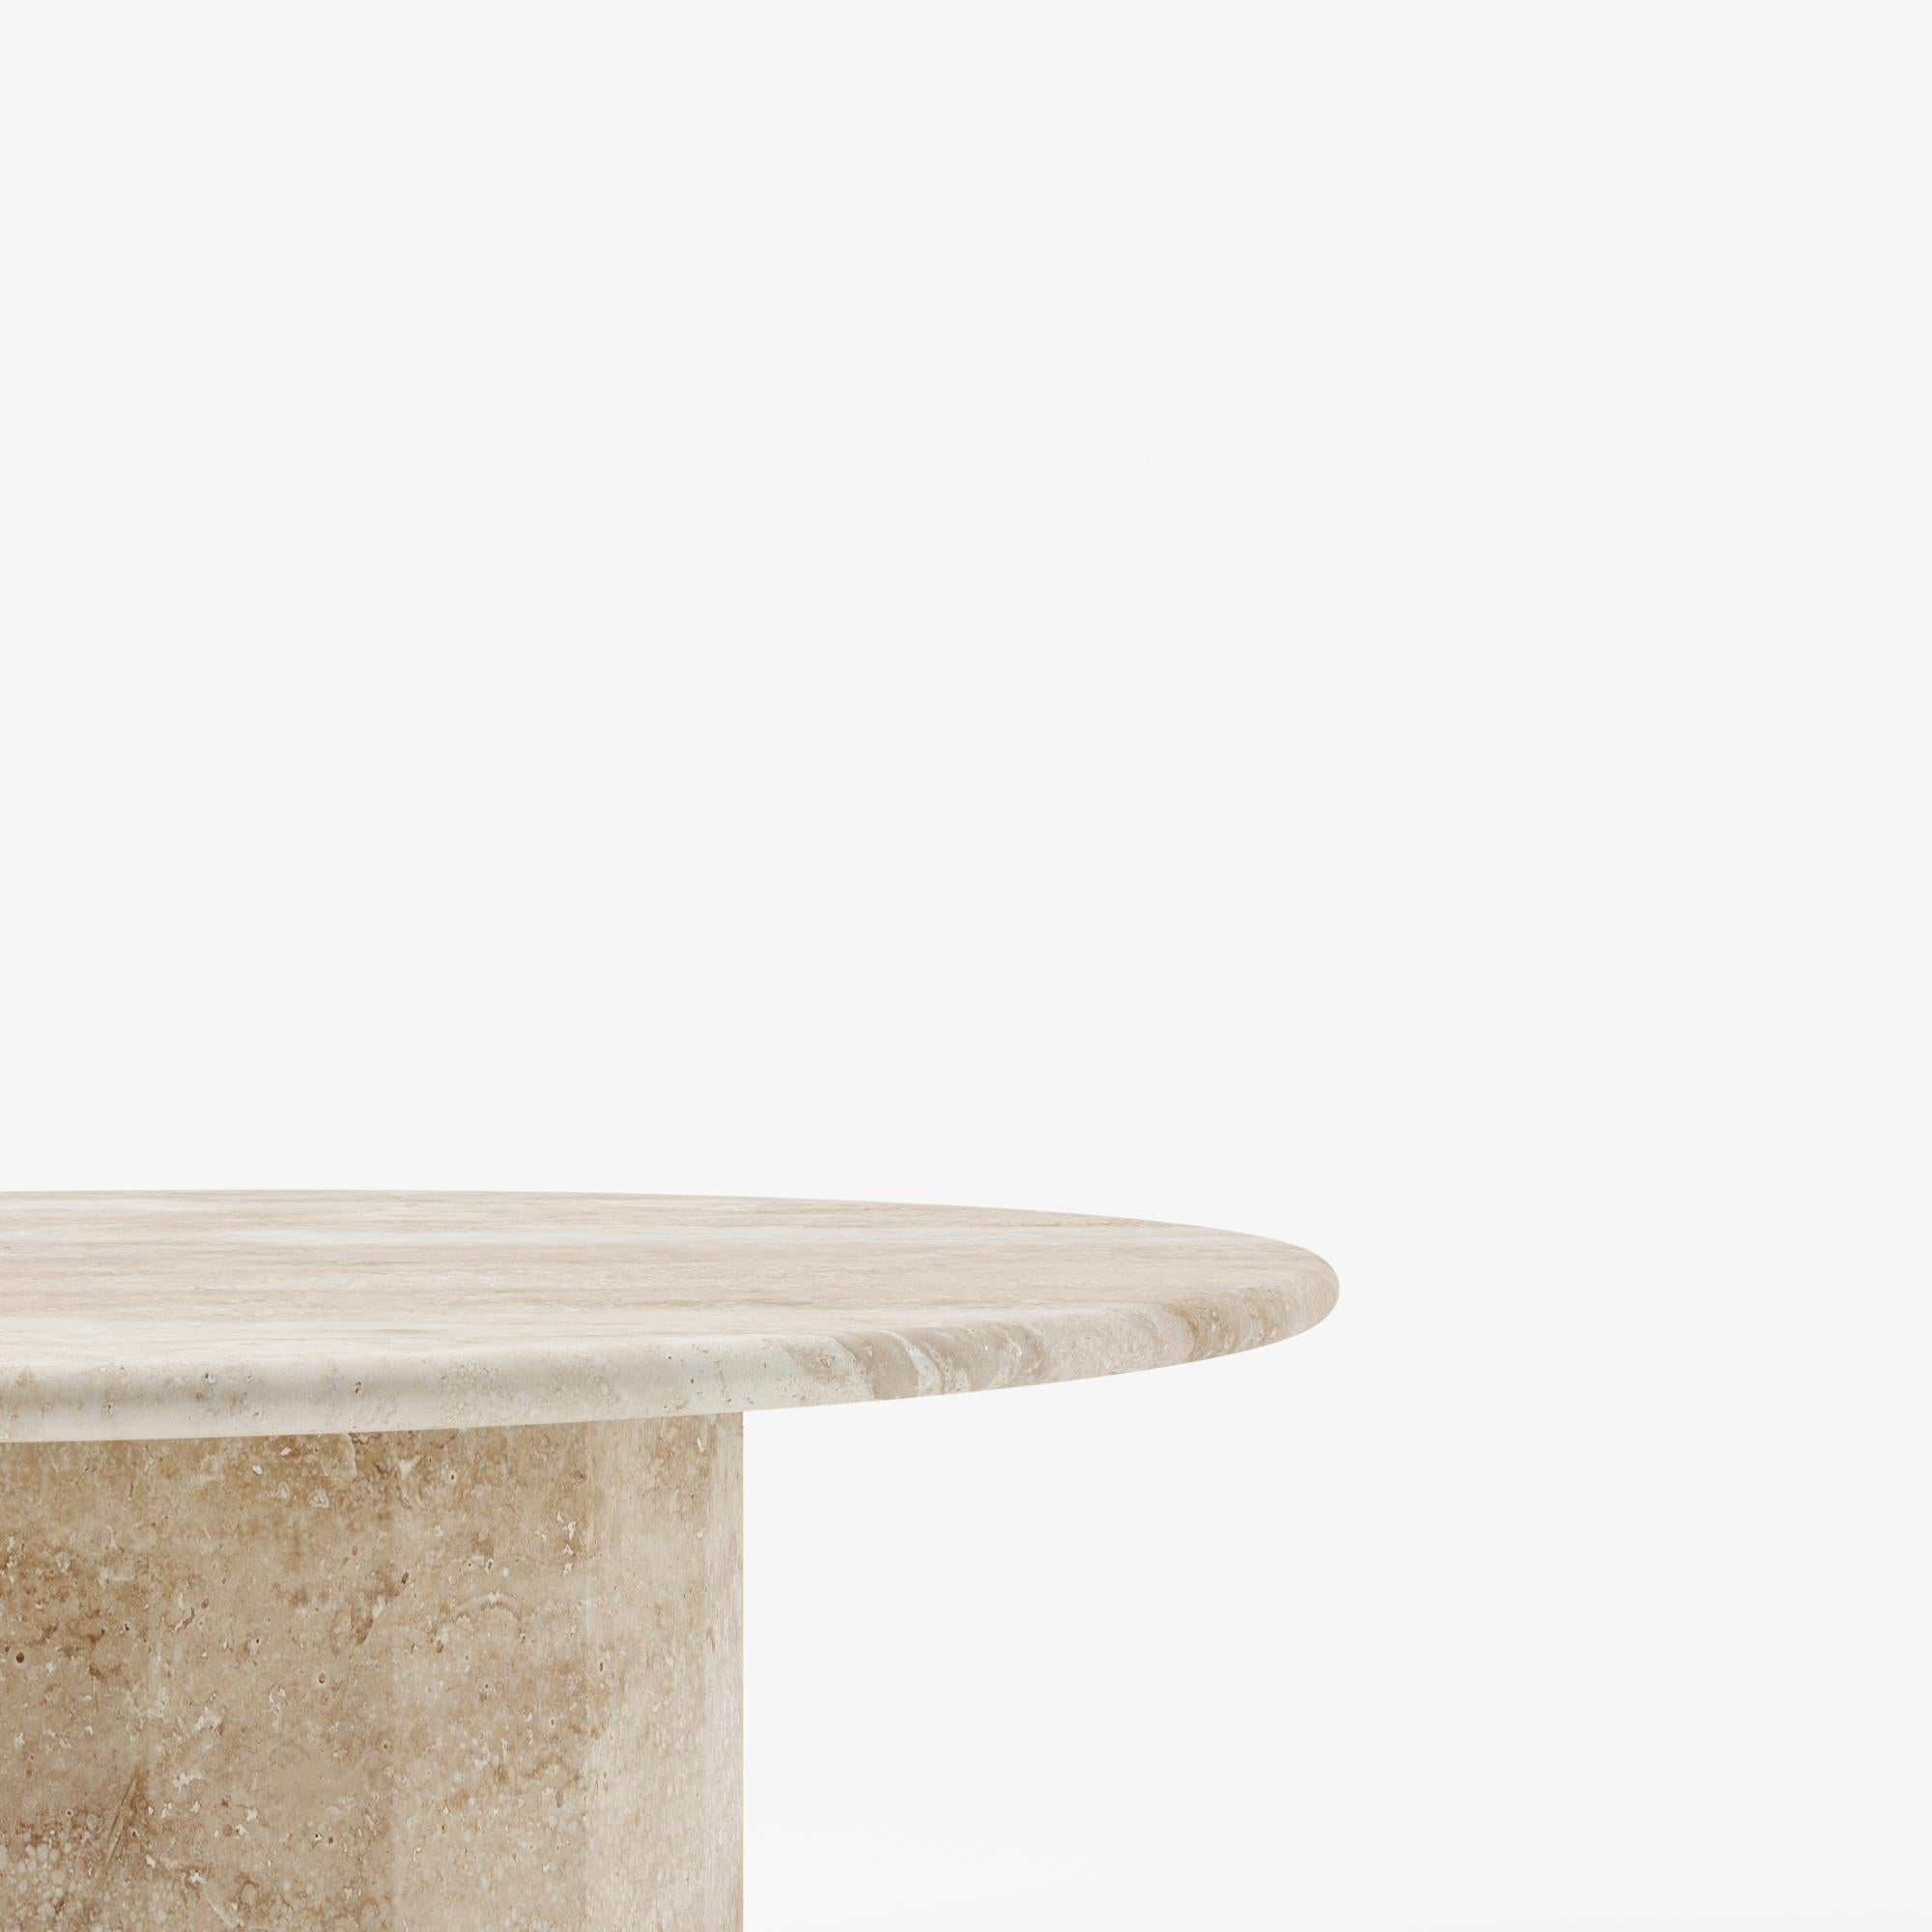 The Ashby Travertine round coffee table is evidence of Lemon’s journey into increasing simplicity. With a design cued entirely by honed and filled Travertine, its round slim top is countered by a strong faceted base – an intentional and definitive